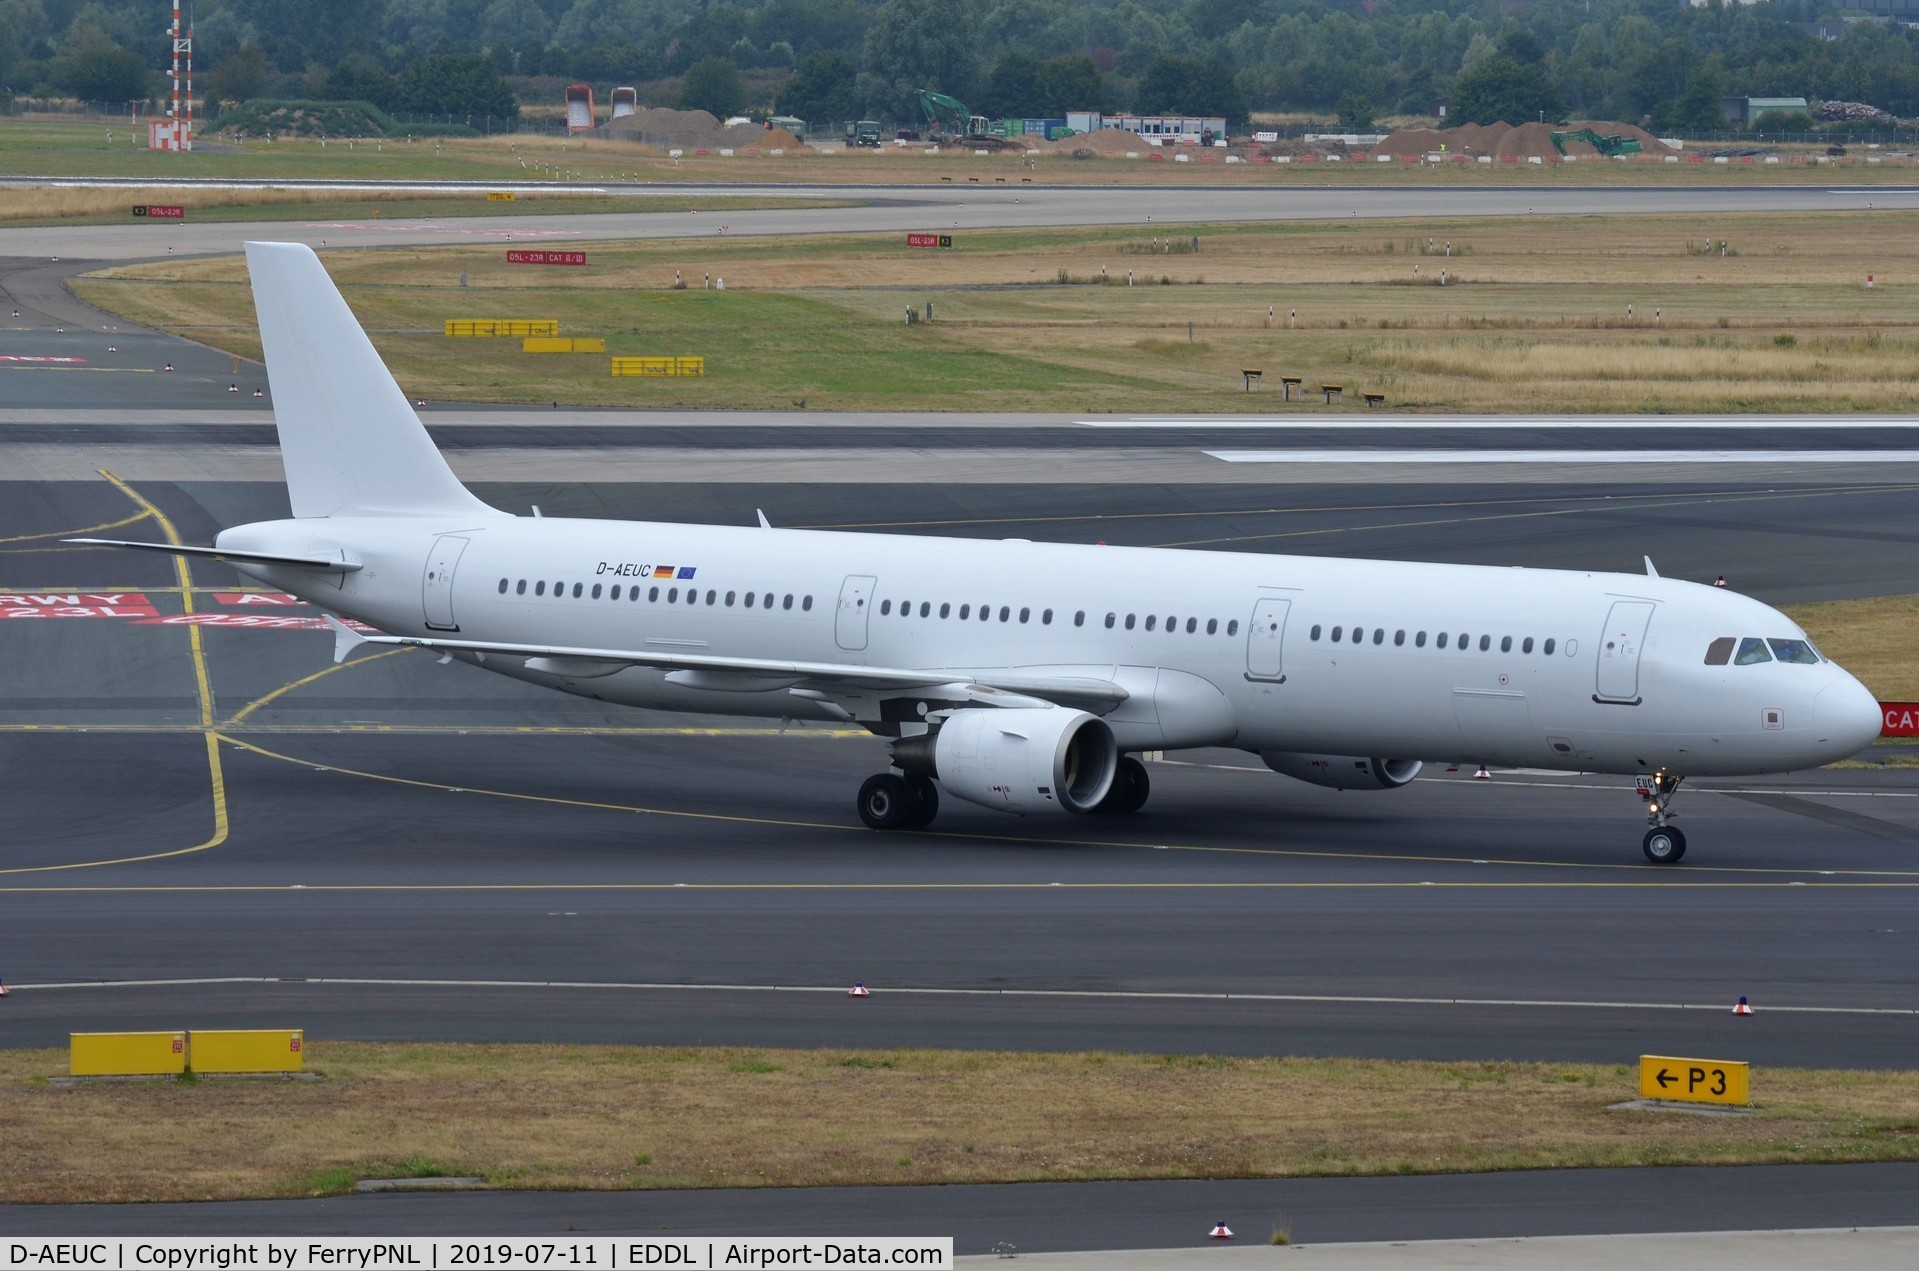 D-AEUC, 2008 Airbus A321-211 C/N 3504, Unmarked Eurowings A321